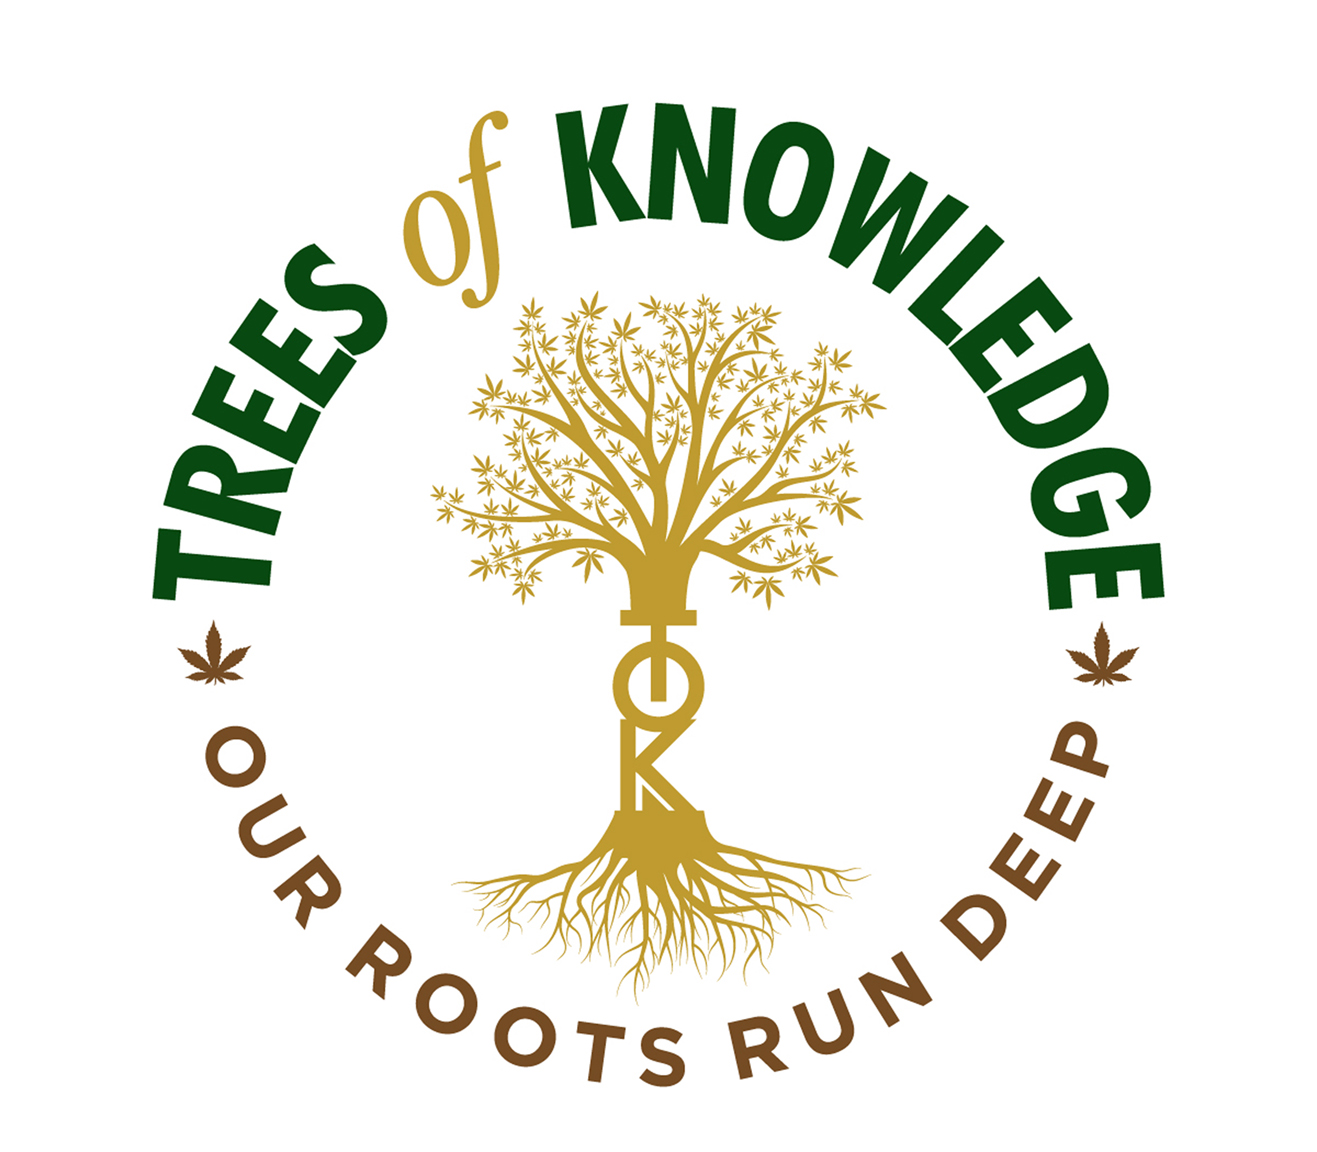 Trees of Knowledge